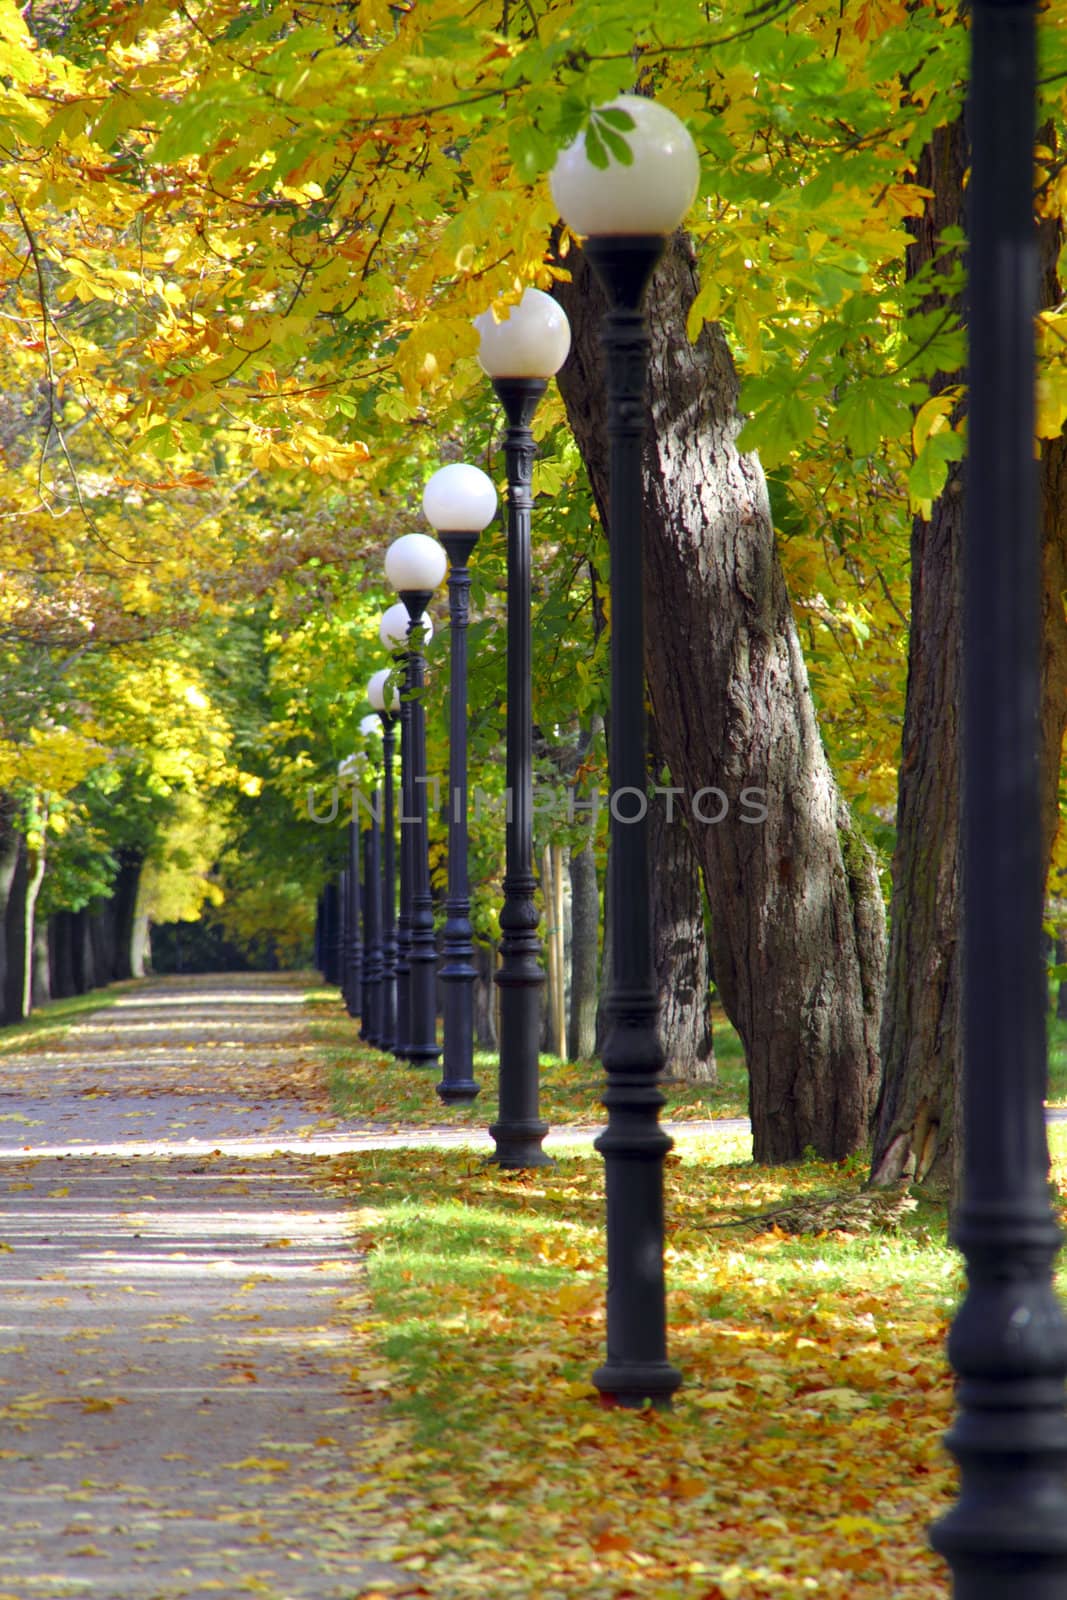 sunny day in park during fall, alley with metal post lamps